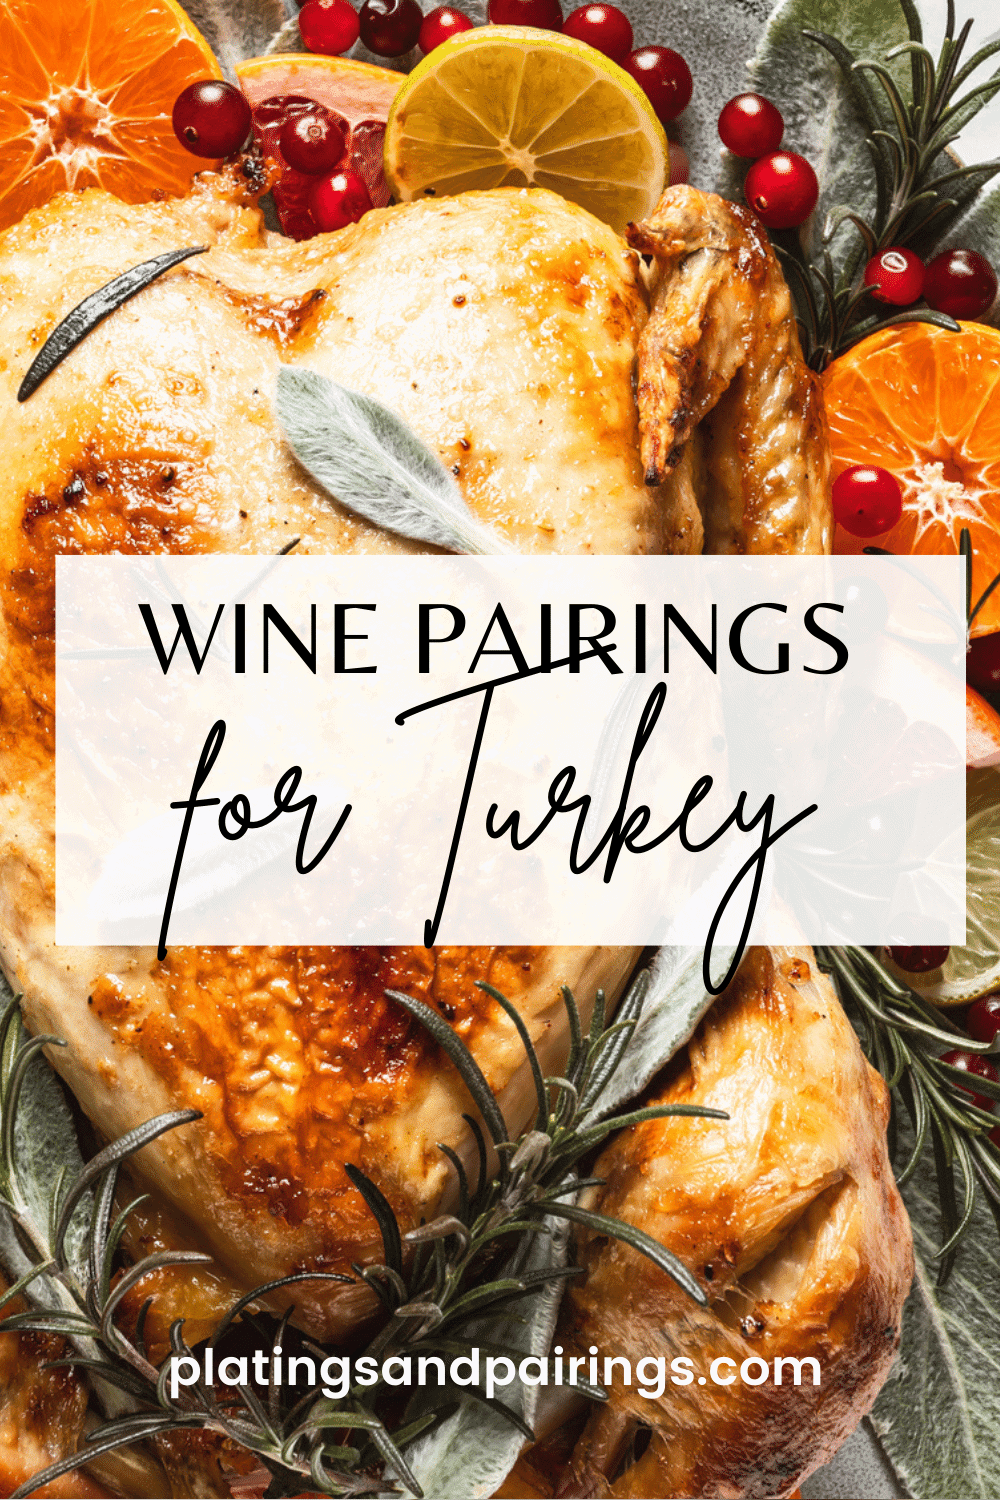 Picture of turkey with text overlay - wine pairings for turkey.